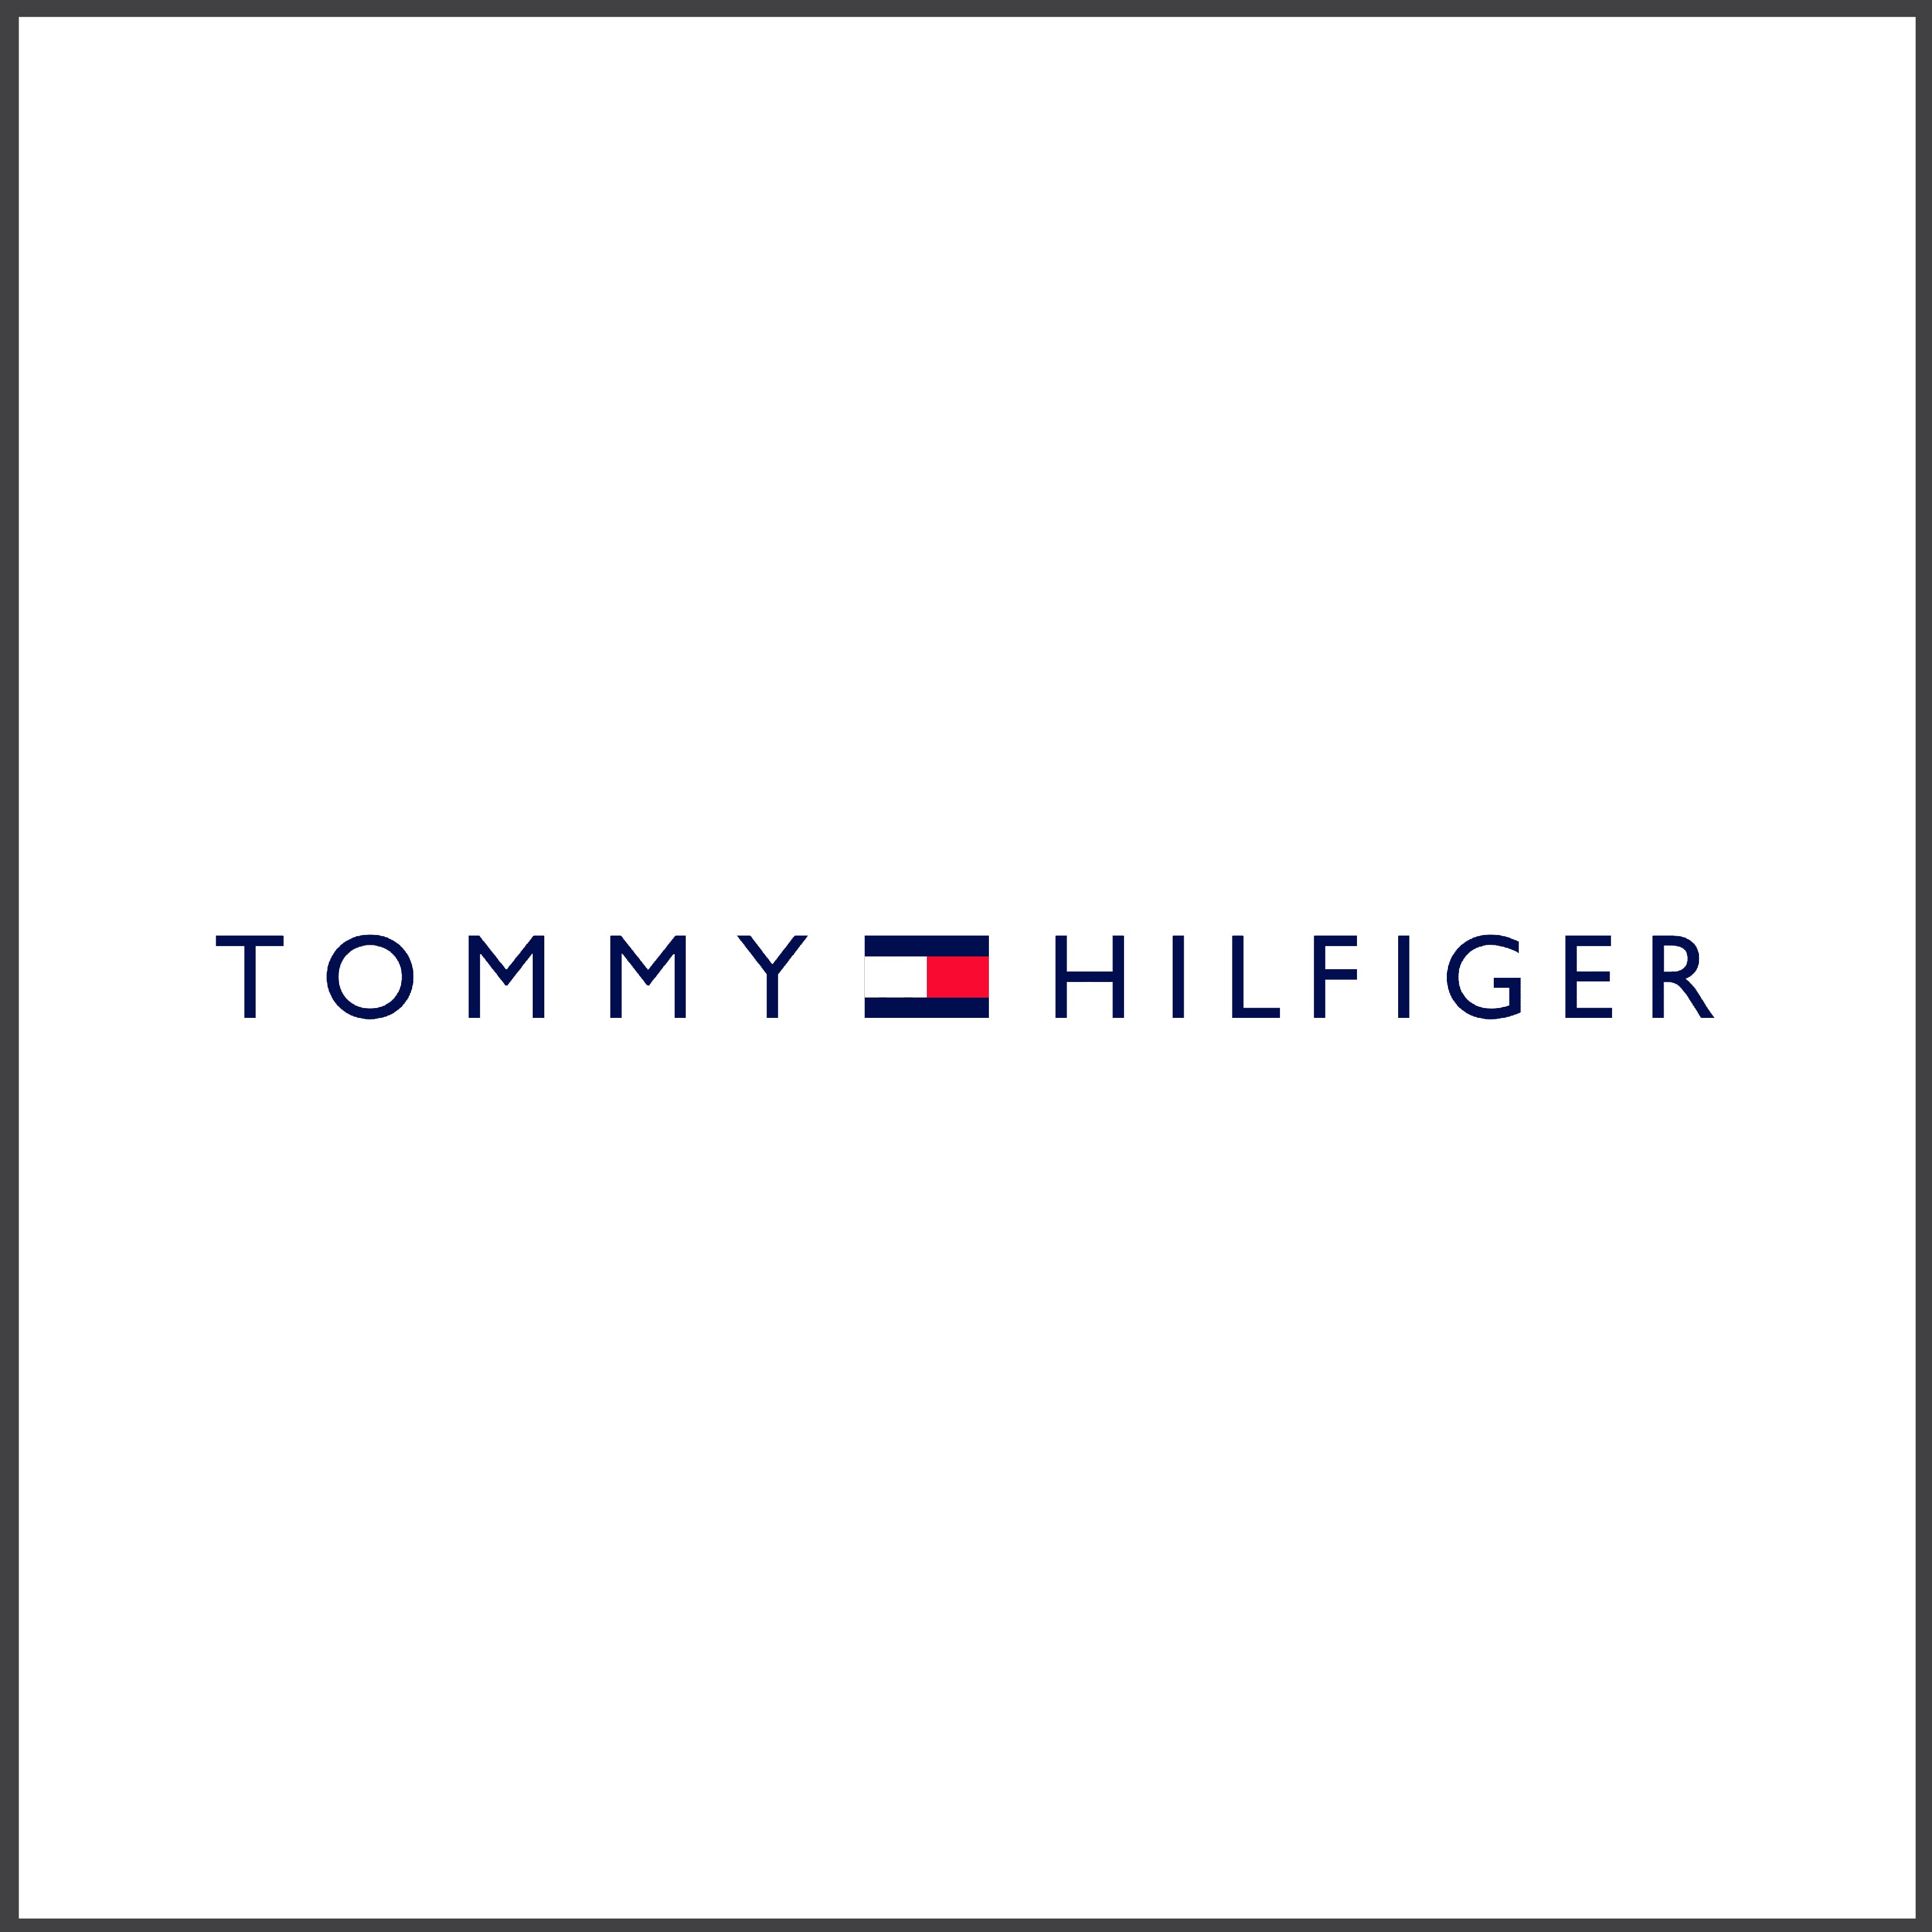 Tommy Hilfiger Collection